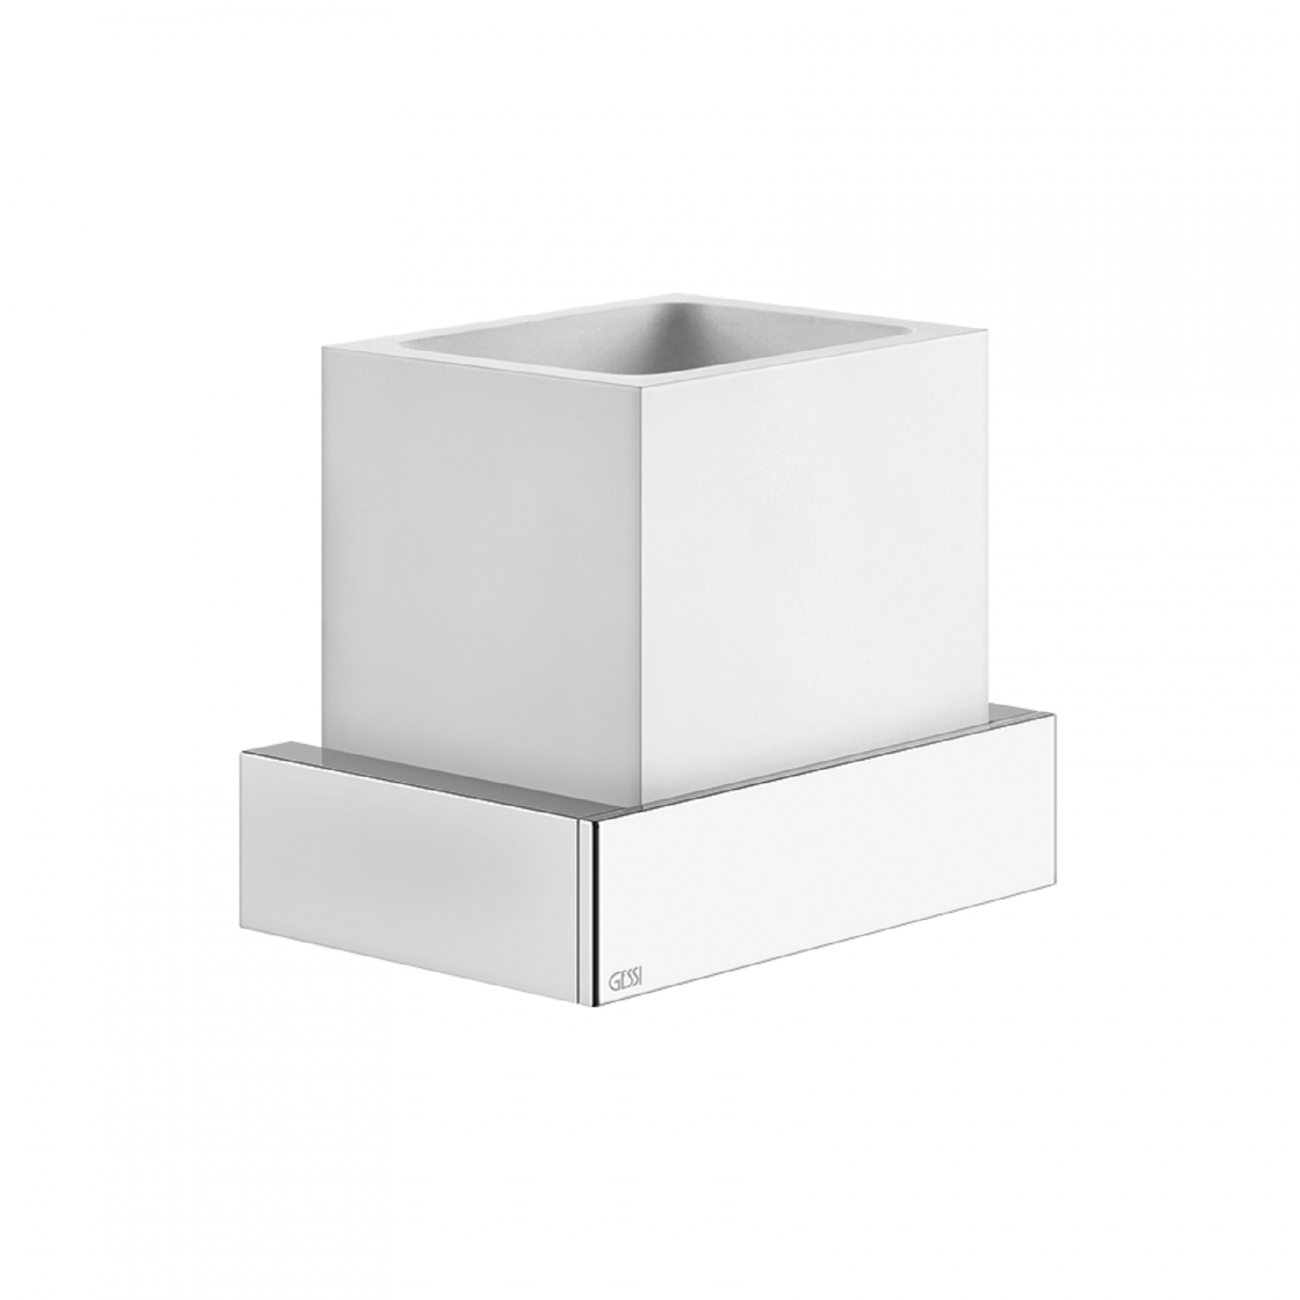 GESSI RETTANGOLO ACCESSORIES WALL MOUNTED TUMBLER HOLDER